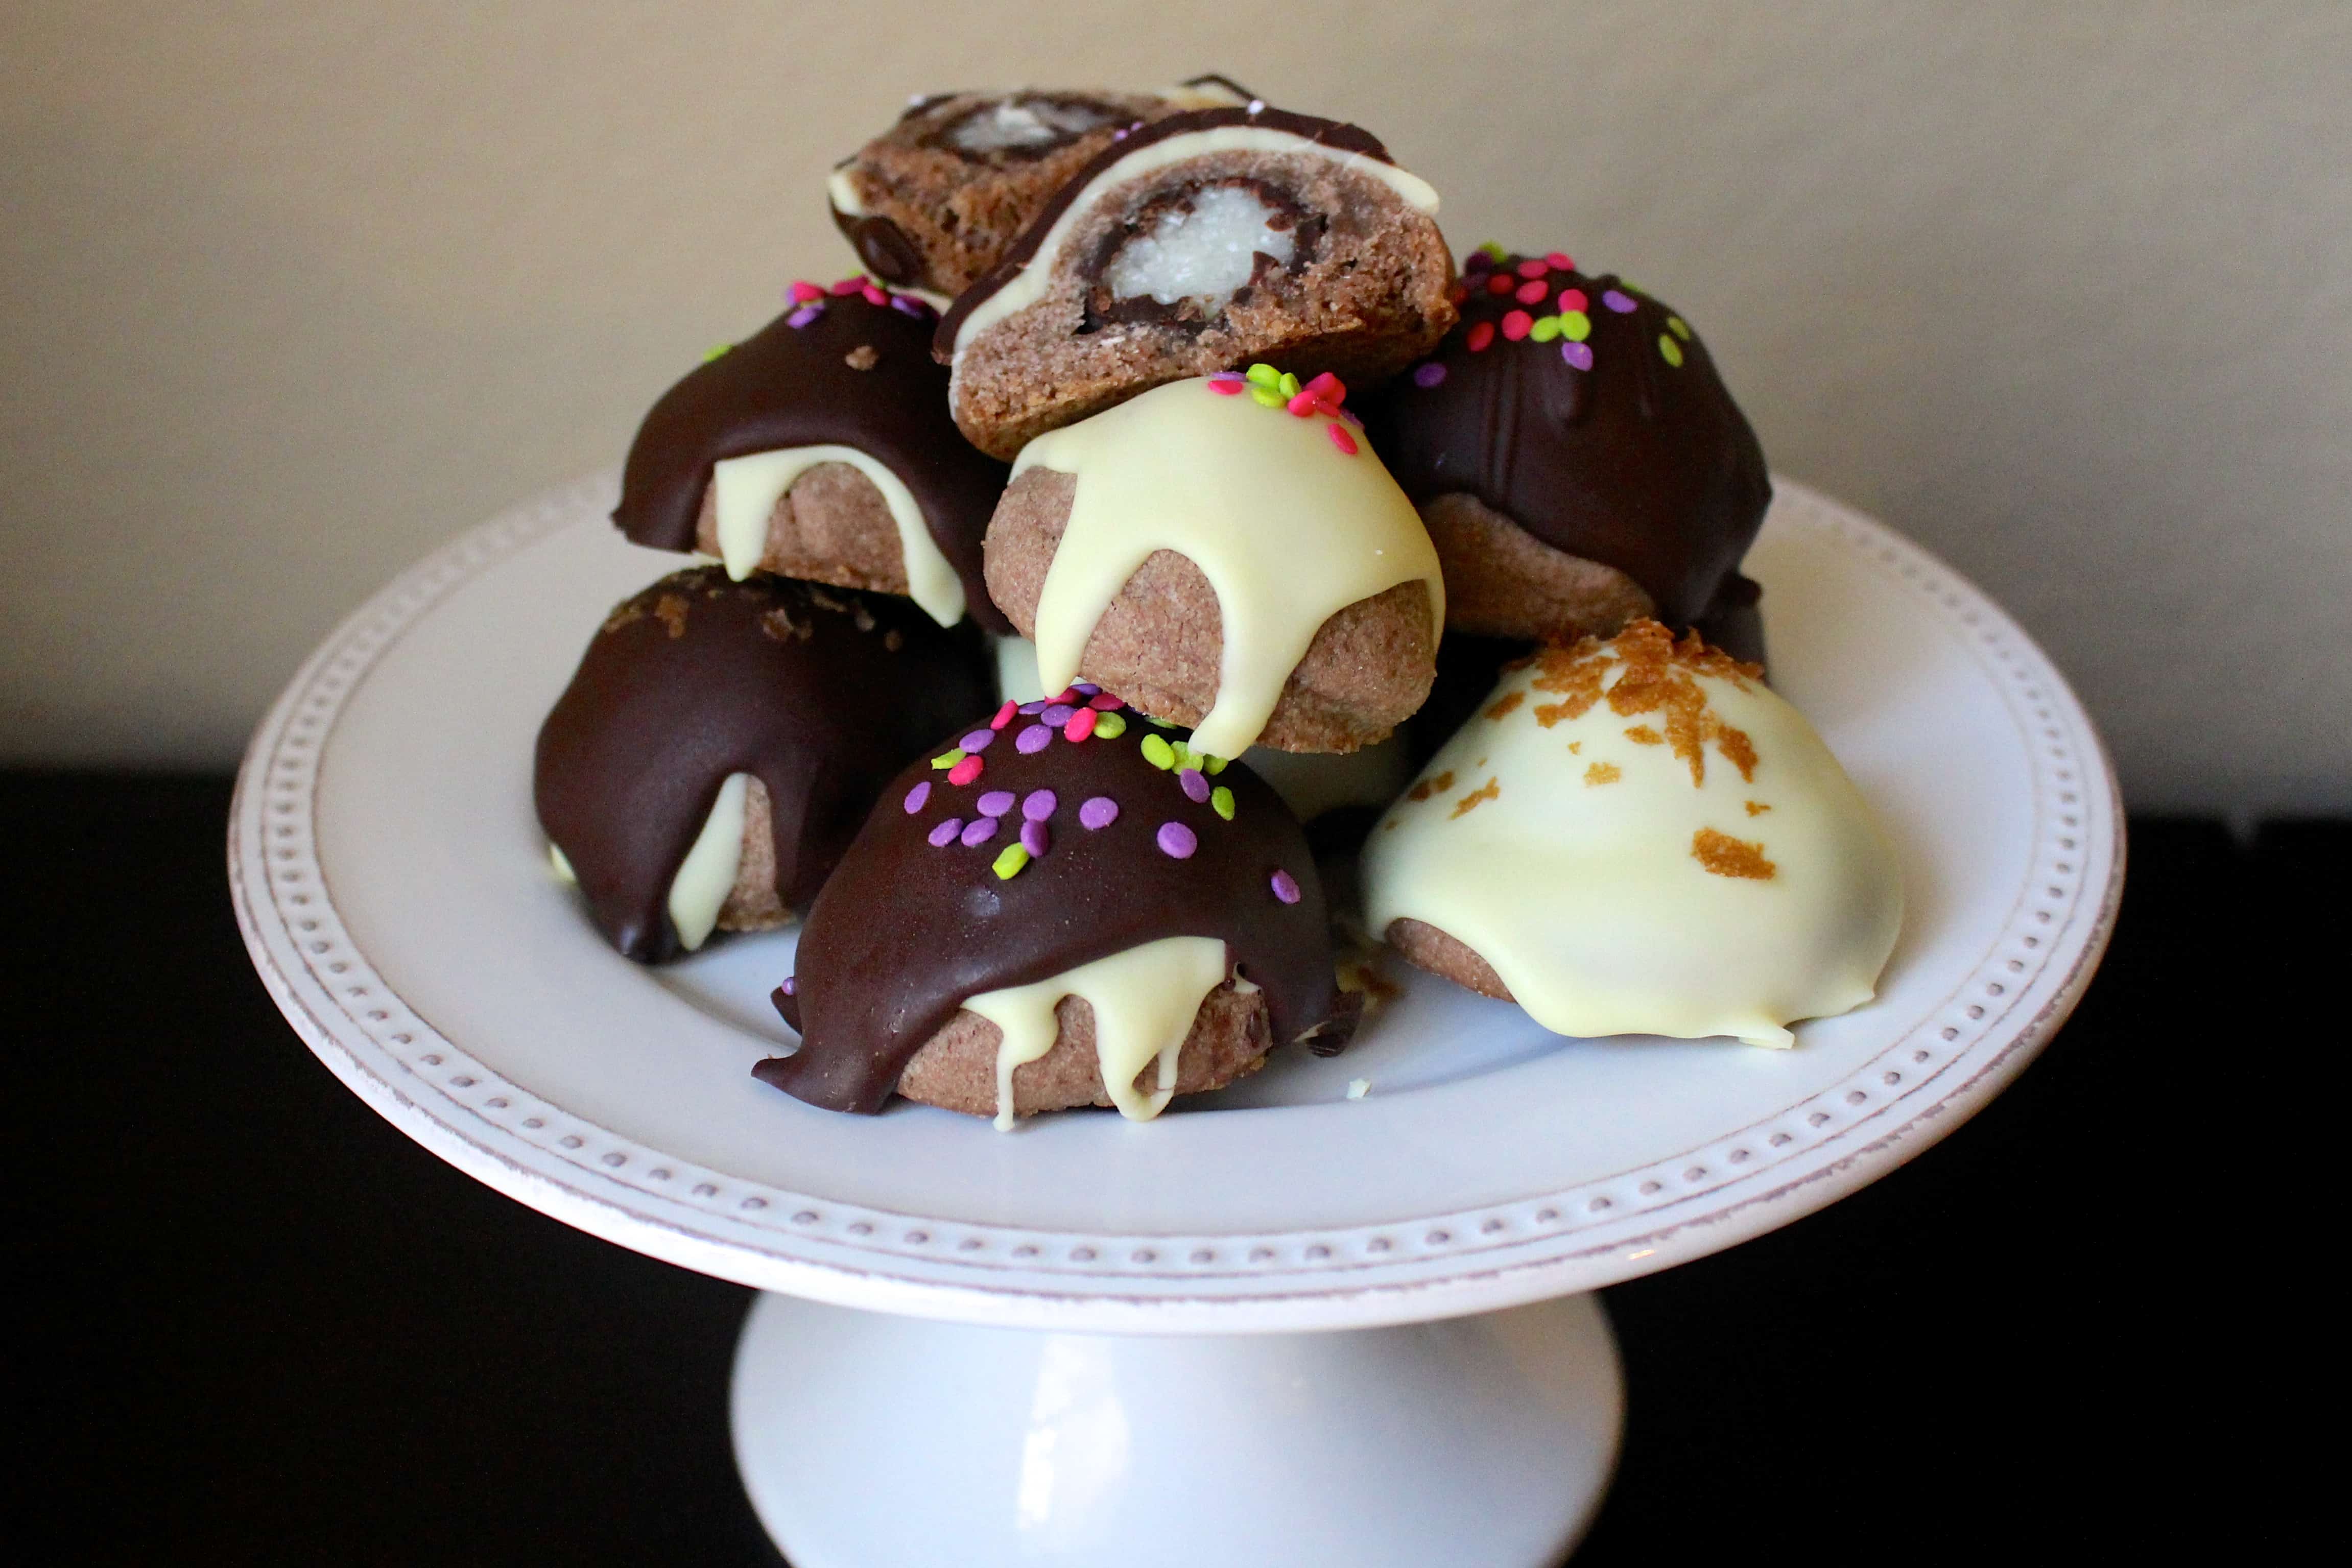 Candy Bar Cookies - 2